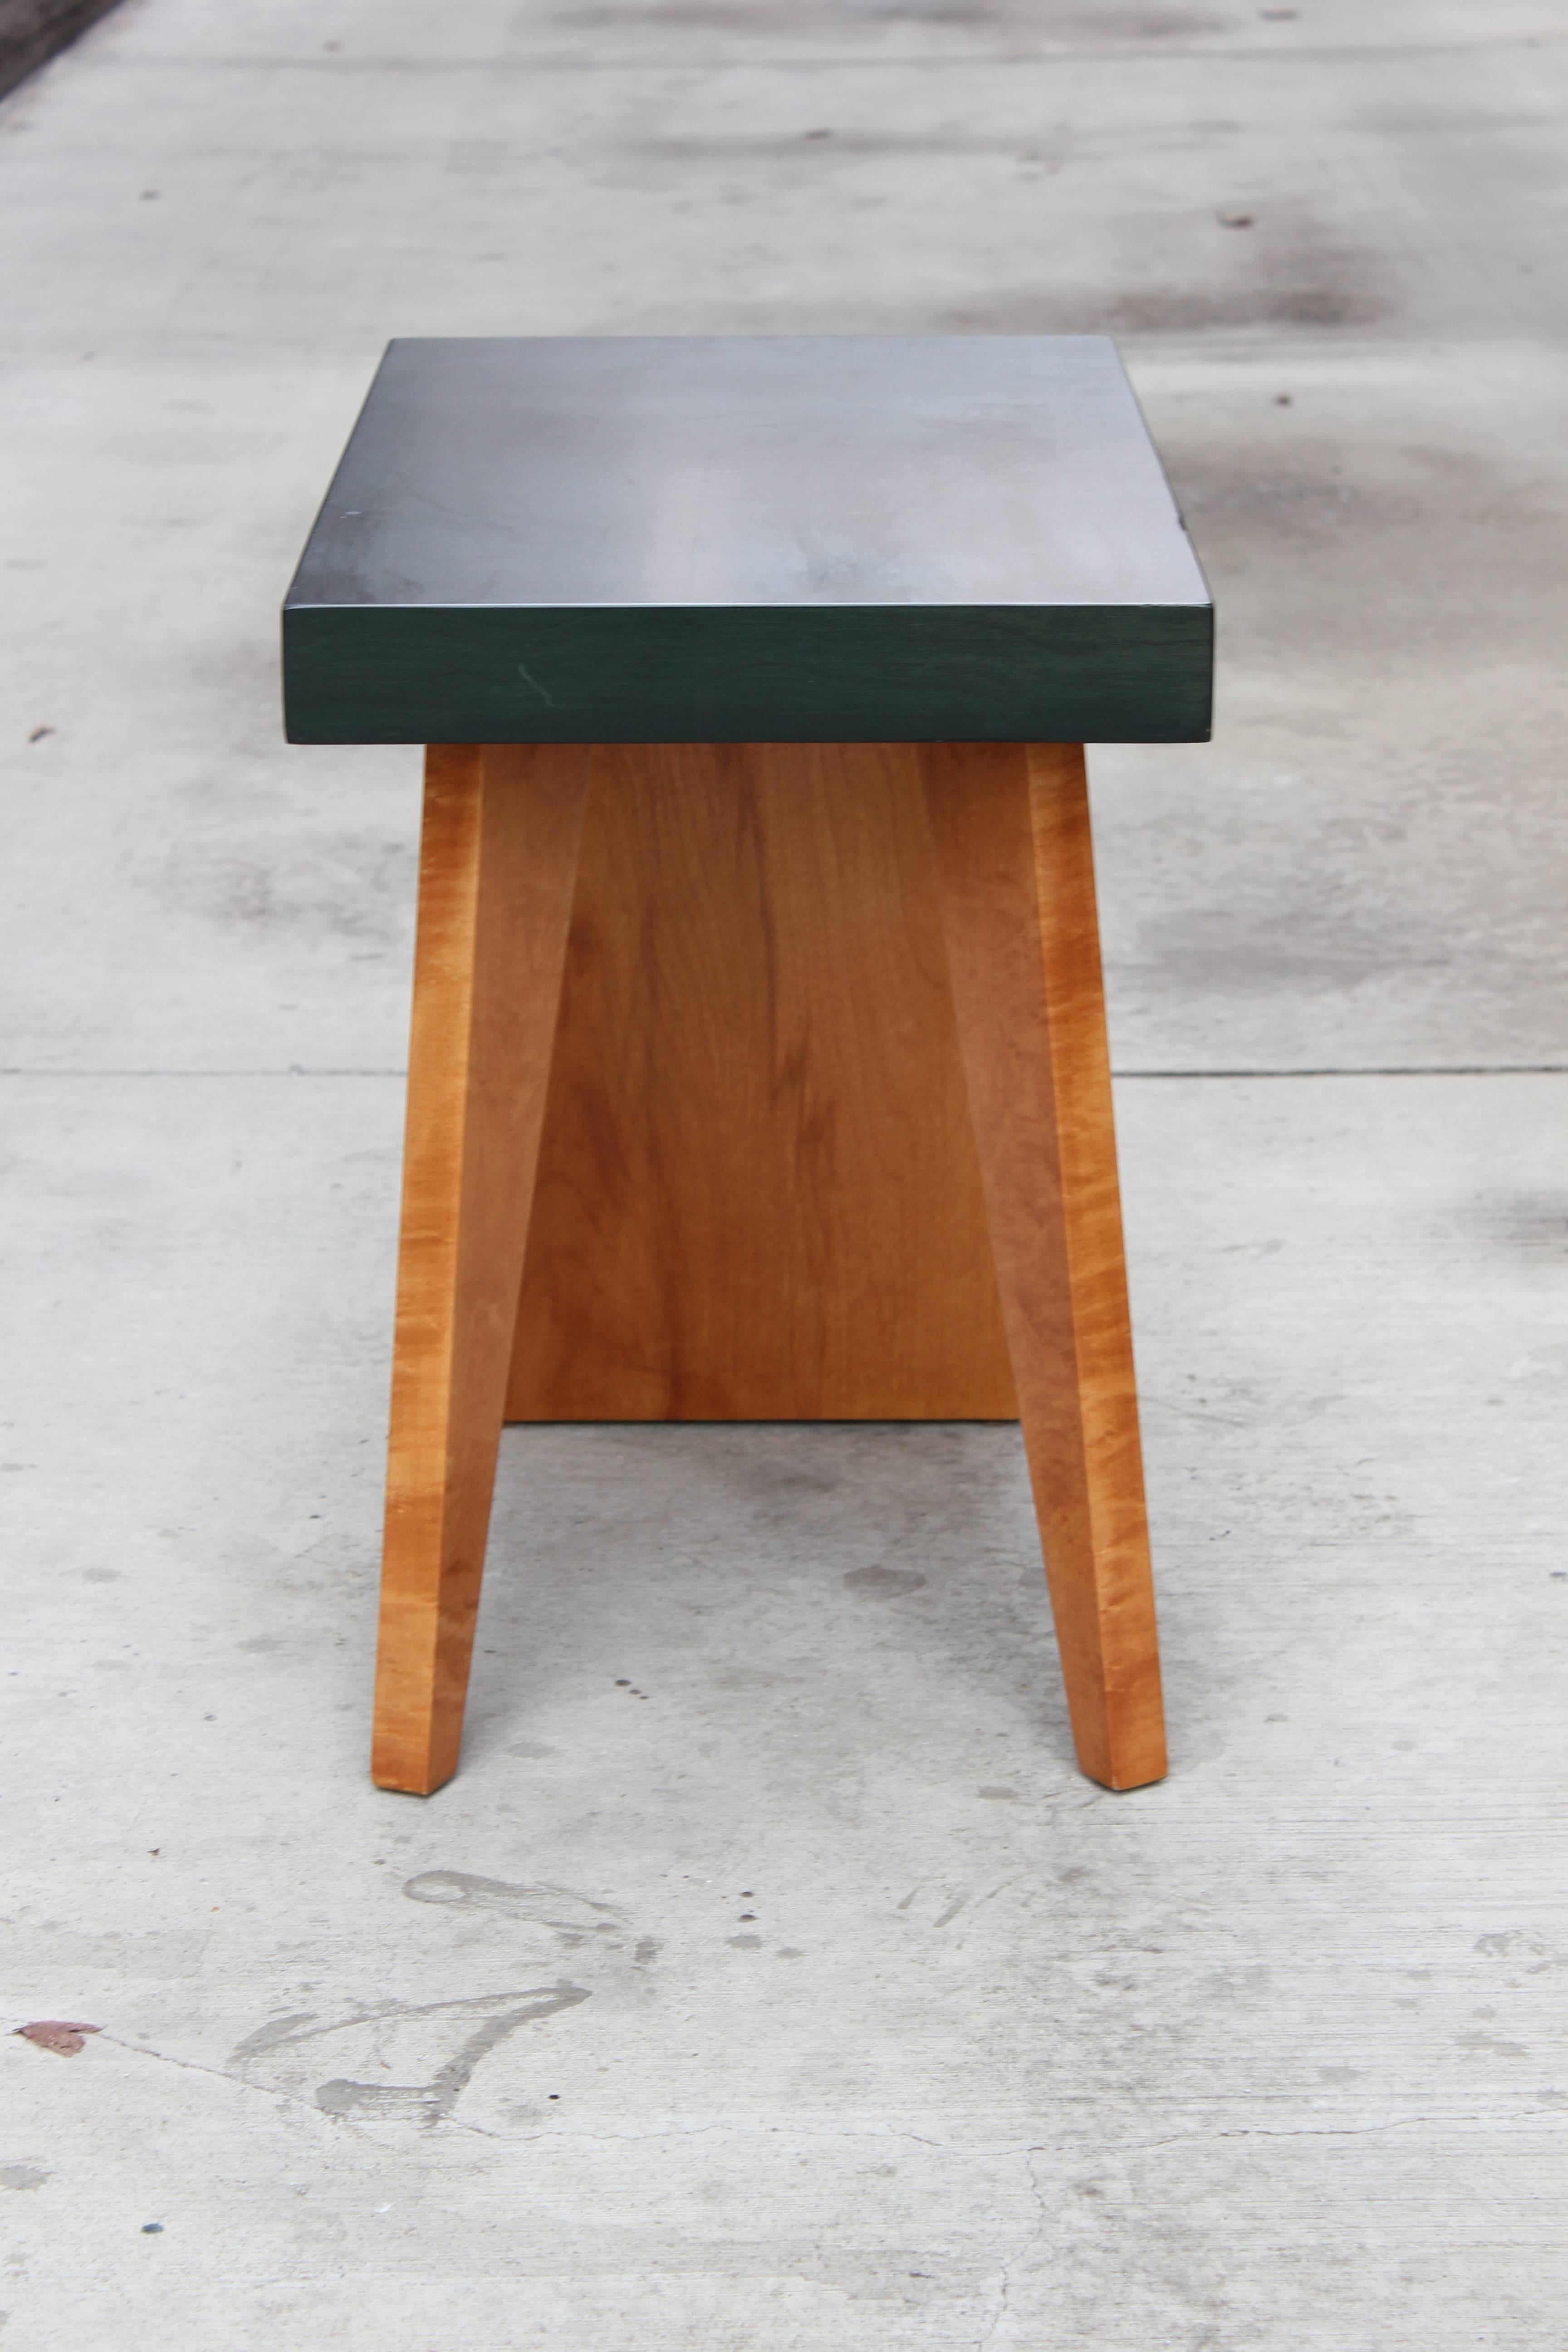 Birch and lacquered green table, circa late 1940s. 

Refinished.